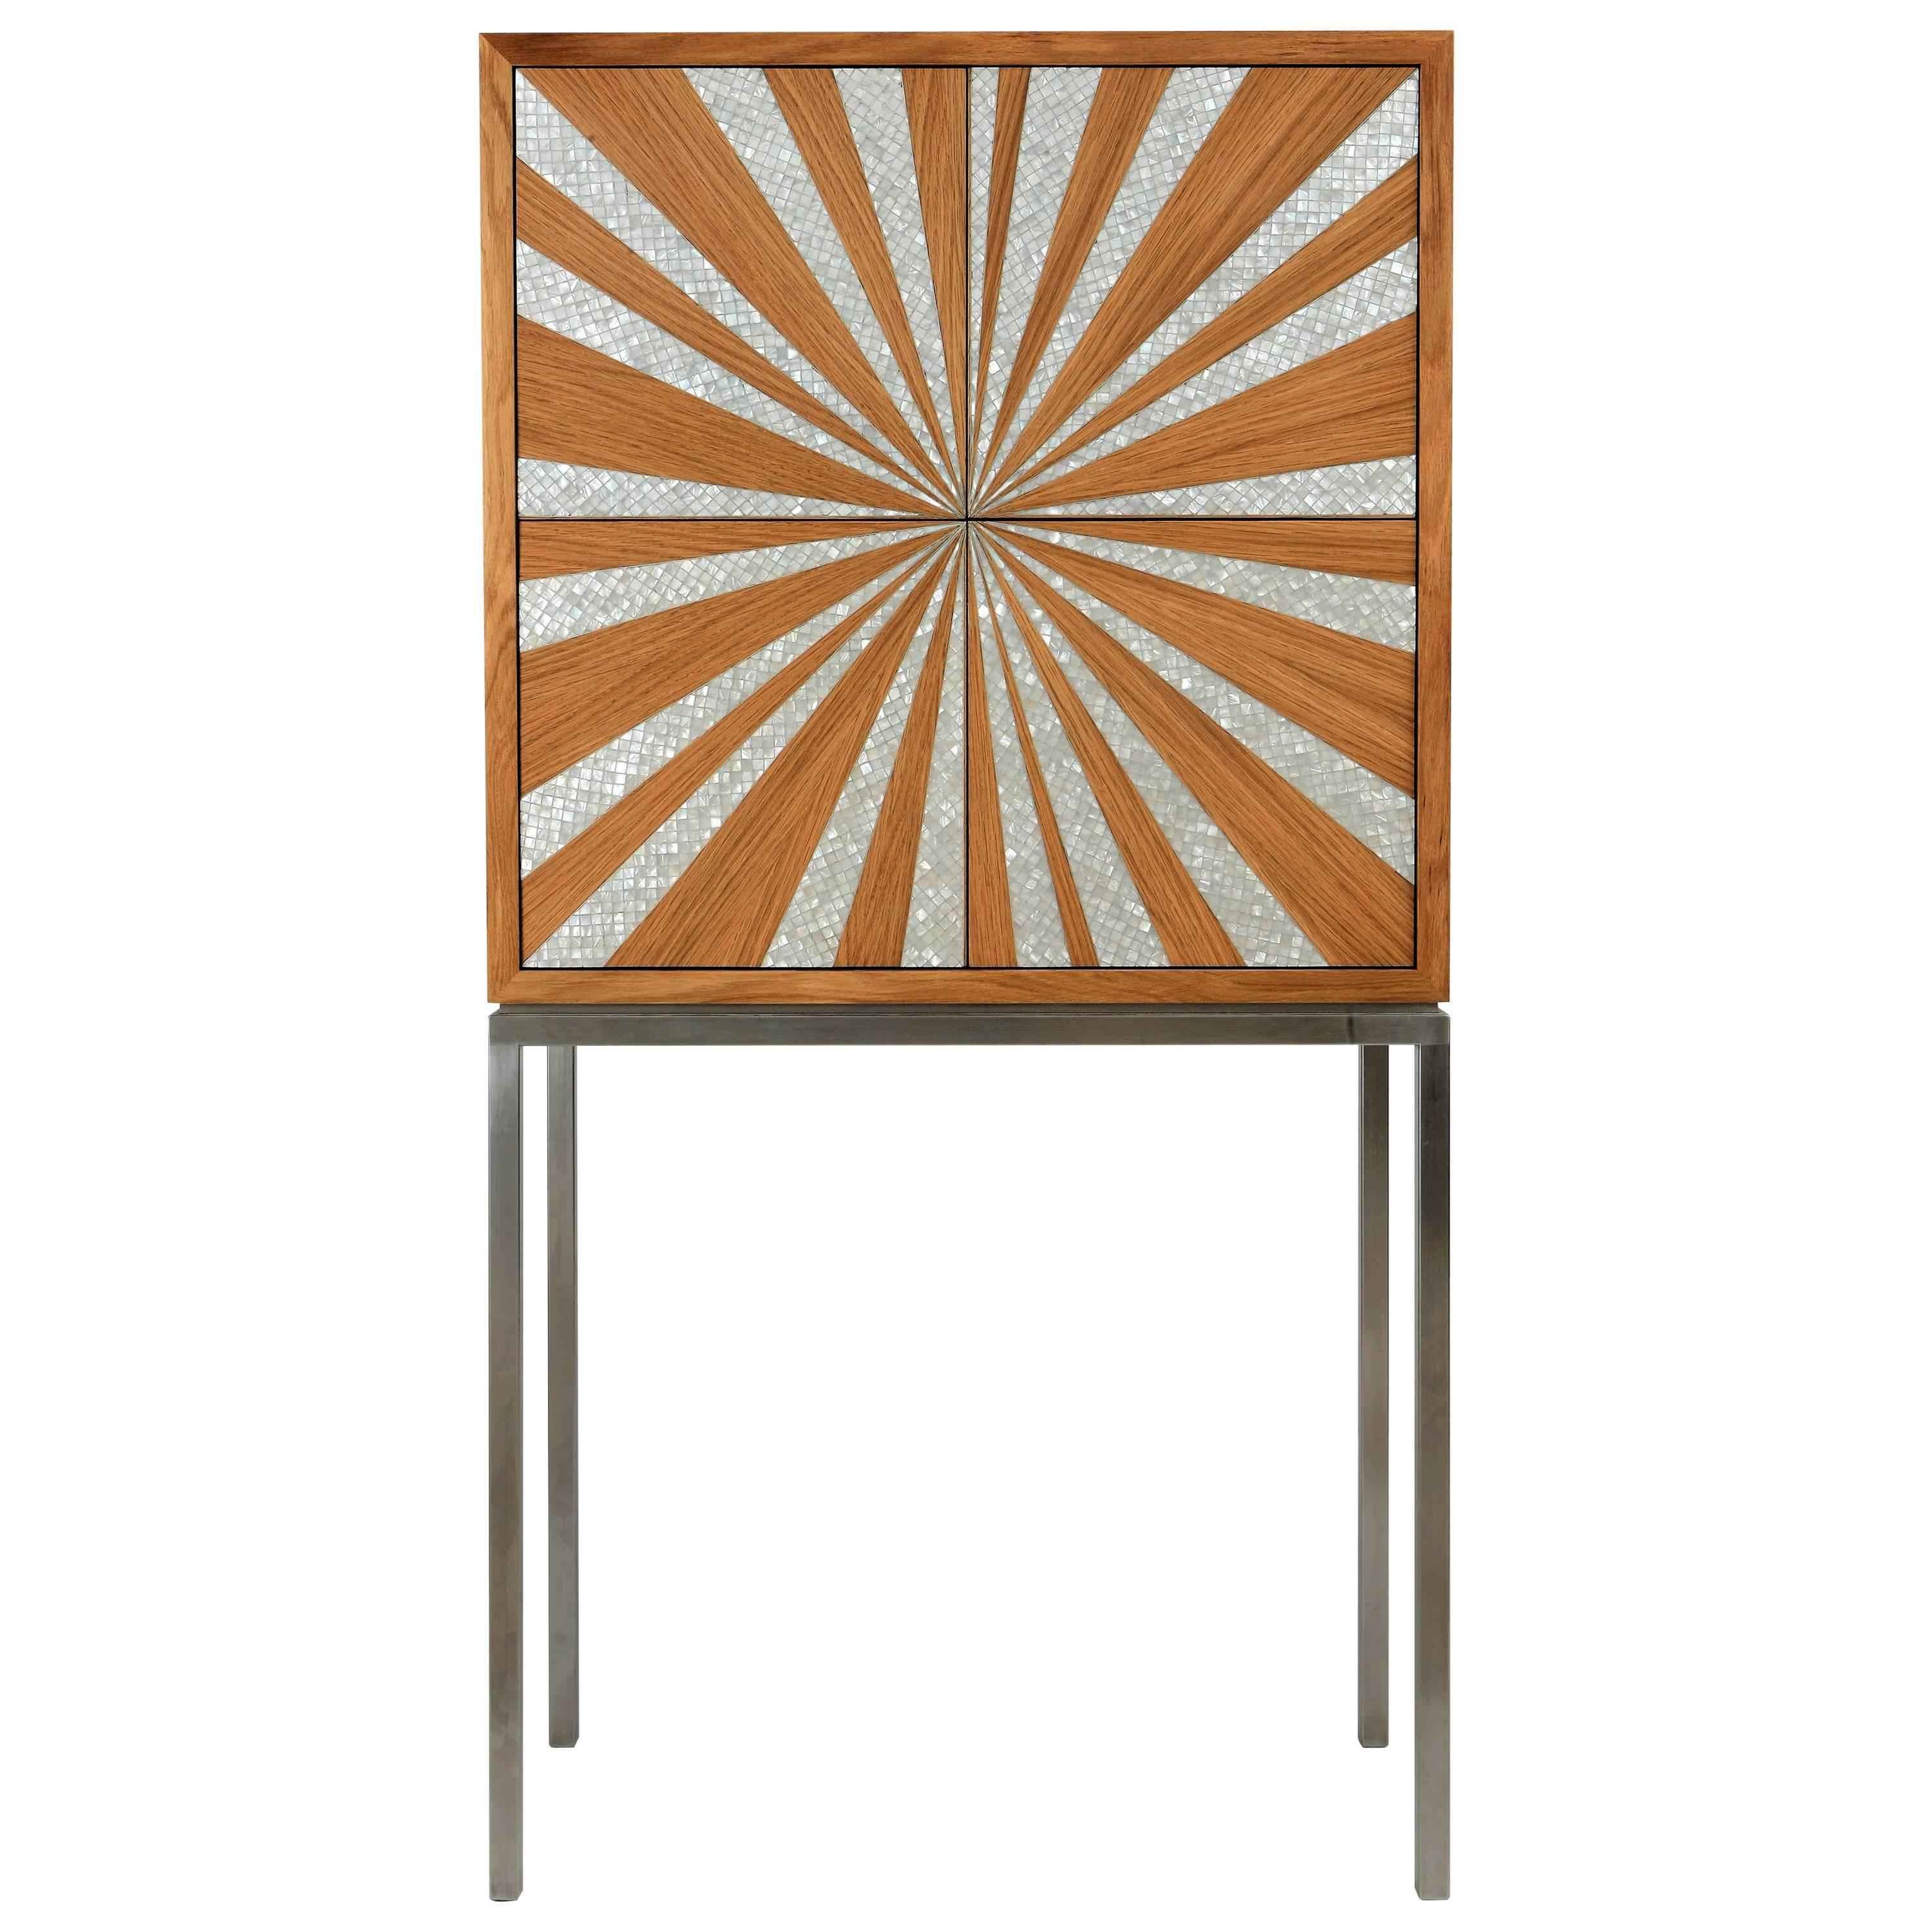 Sun Cabinet by Nada Debs, Contemporary Cabinet with Mother-of-Pearl Inlay